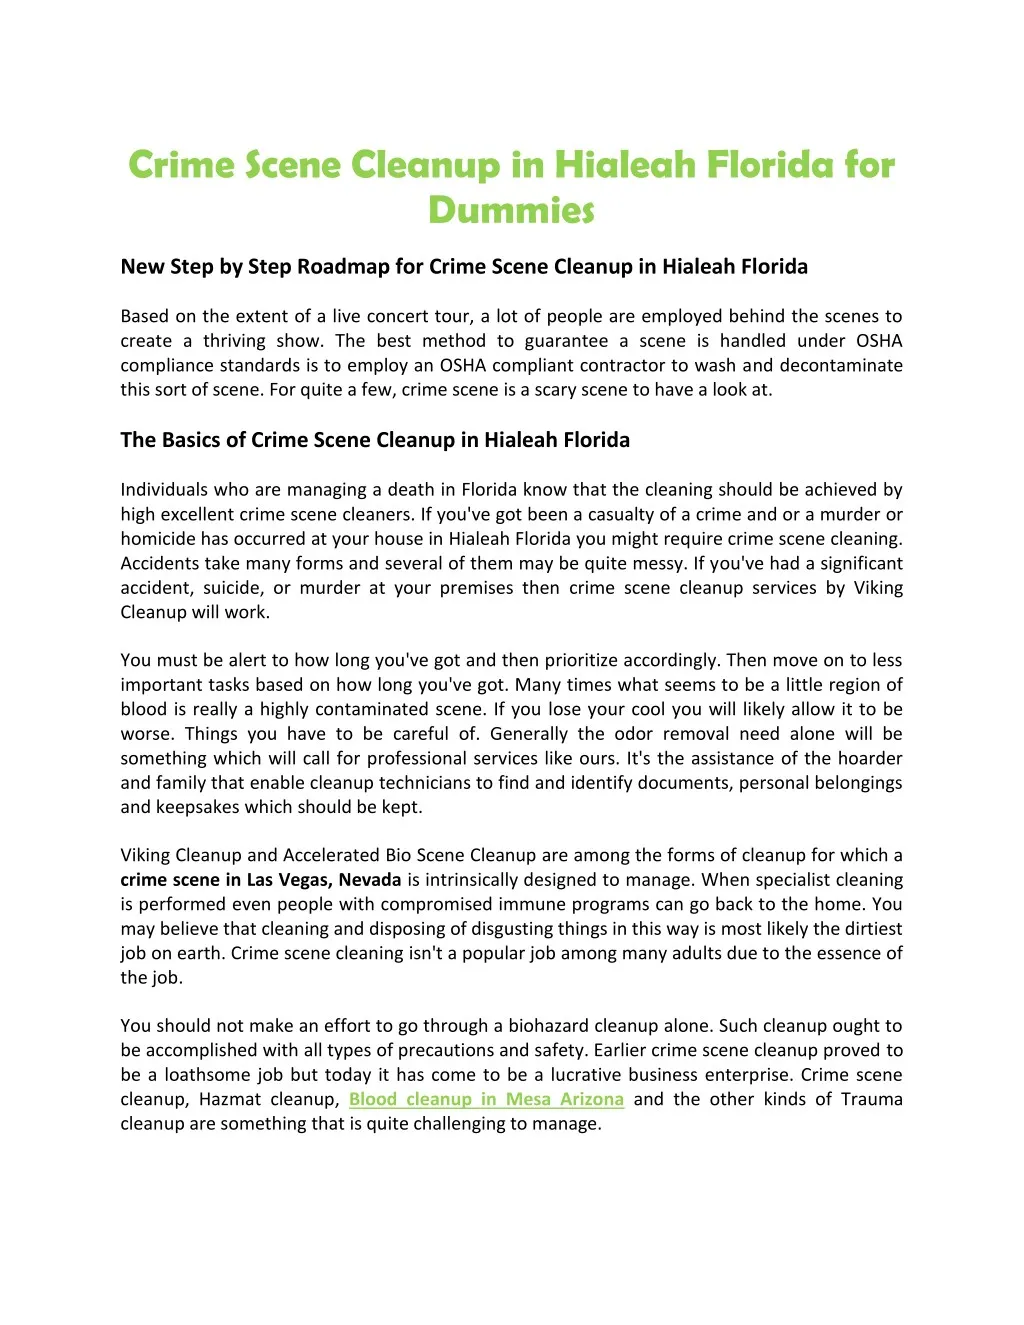 crime scene cleanup in hialeah florida for dummies